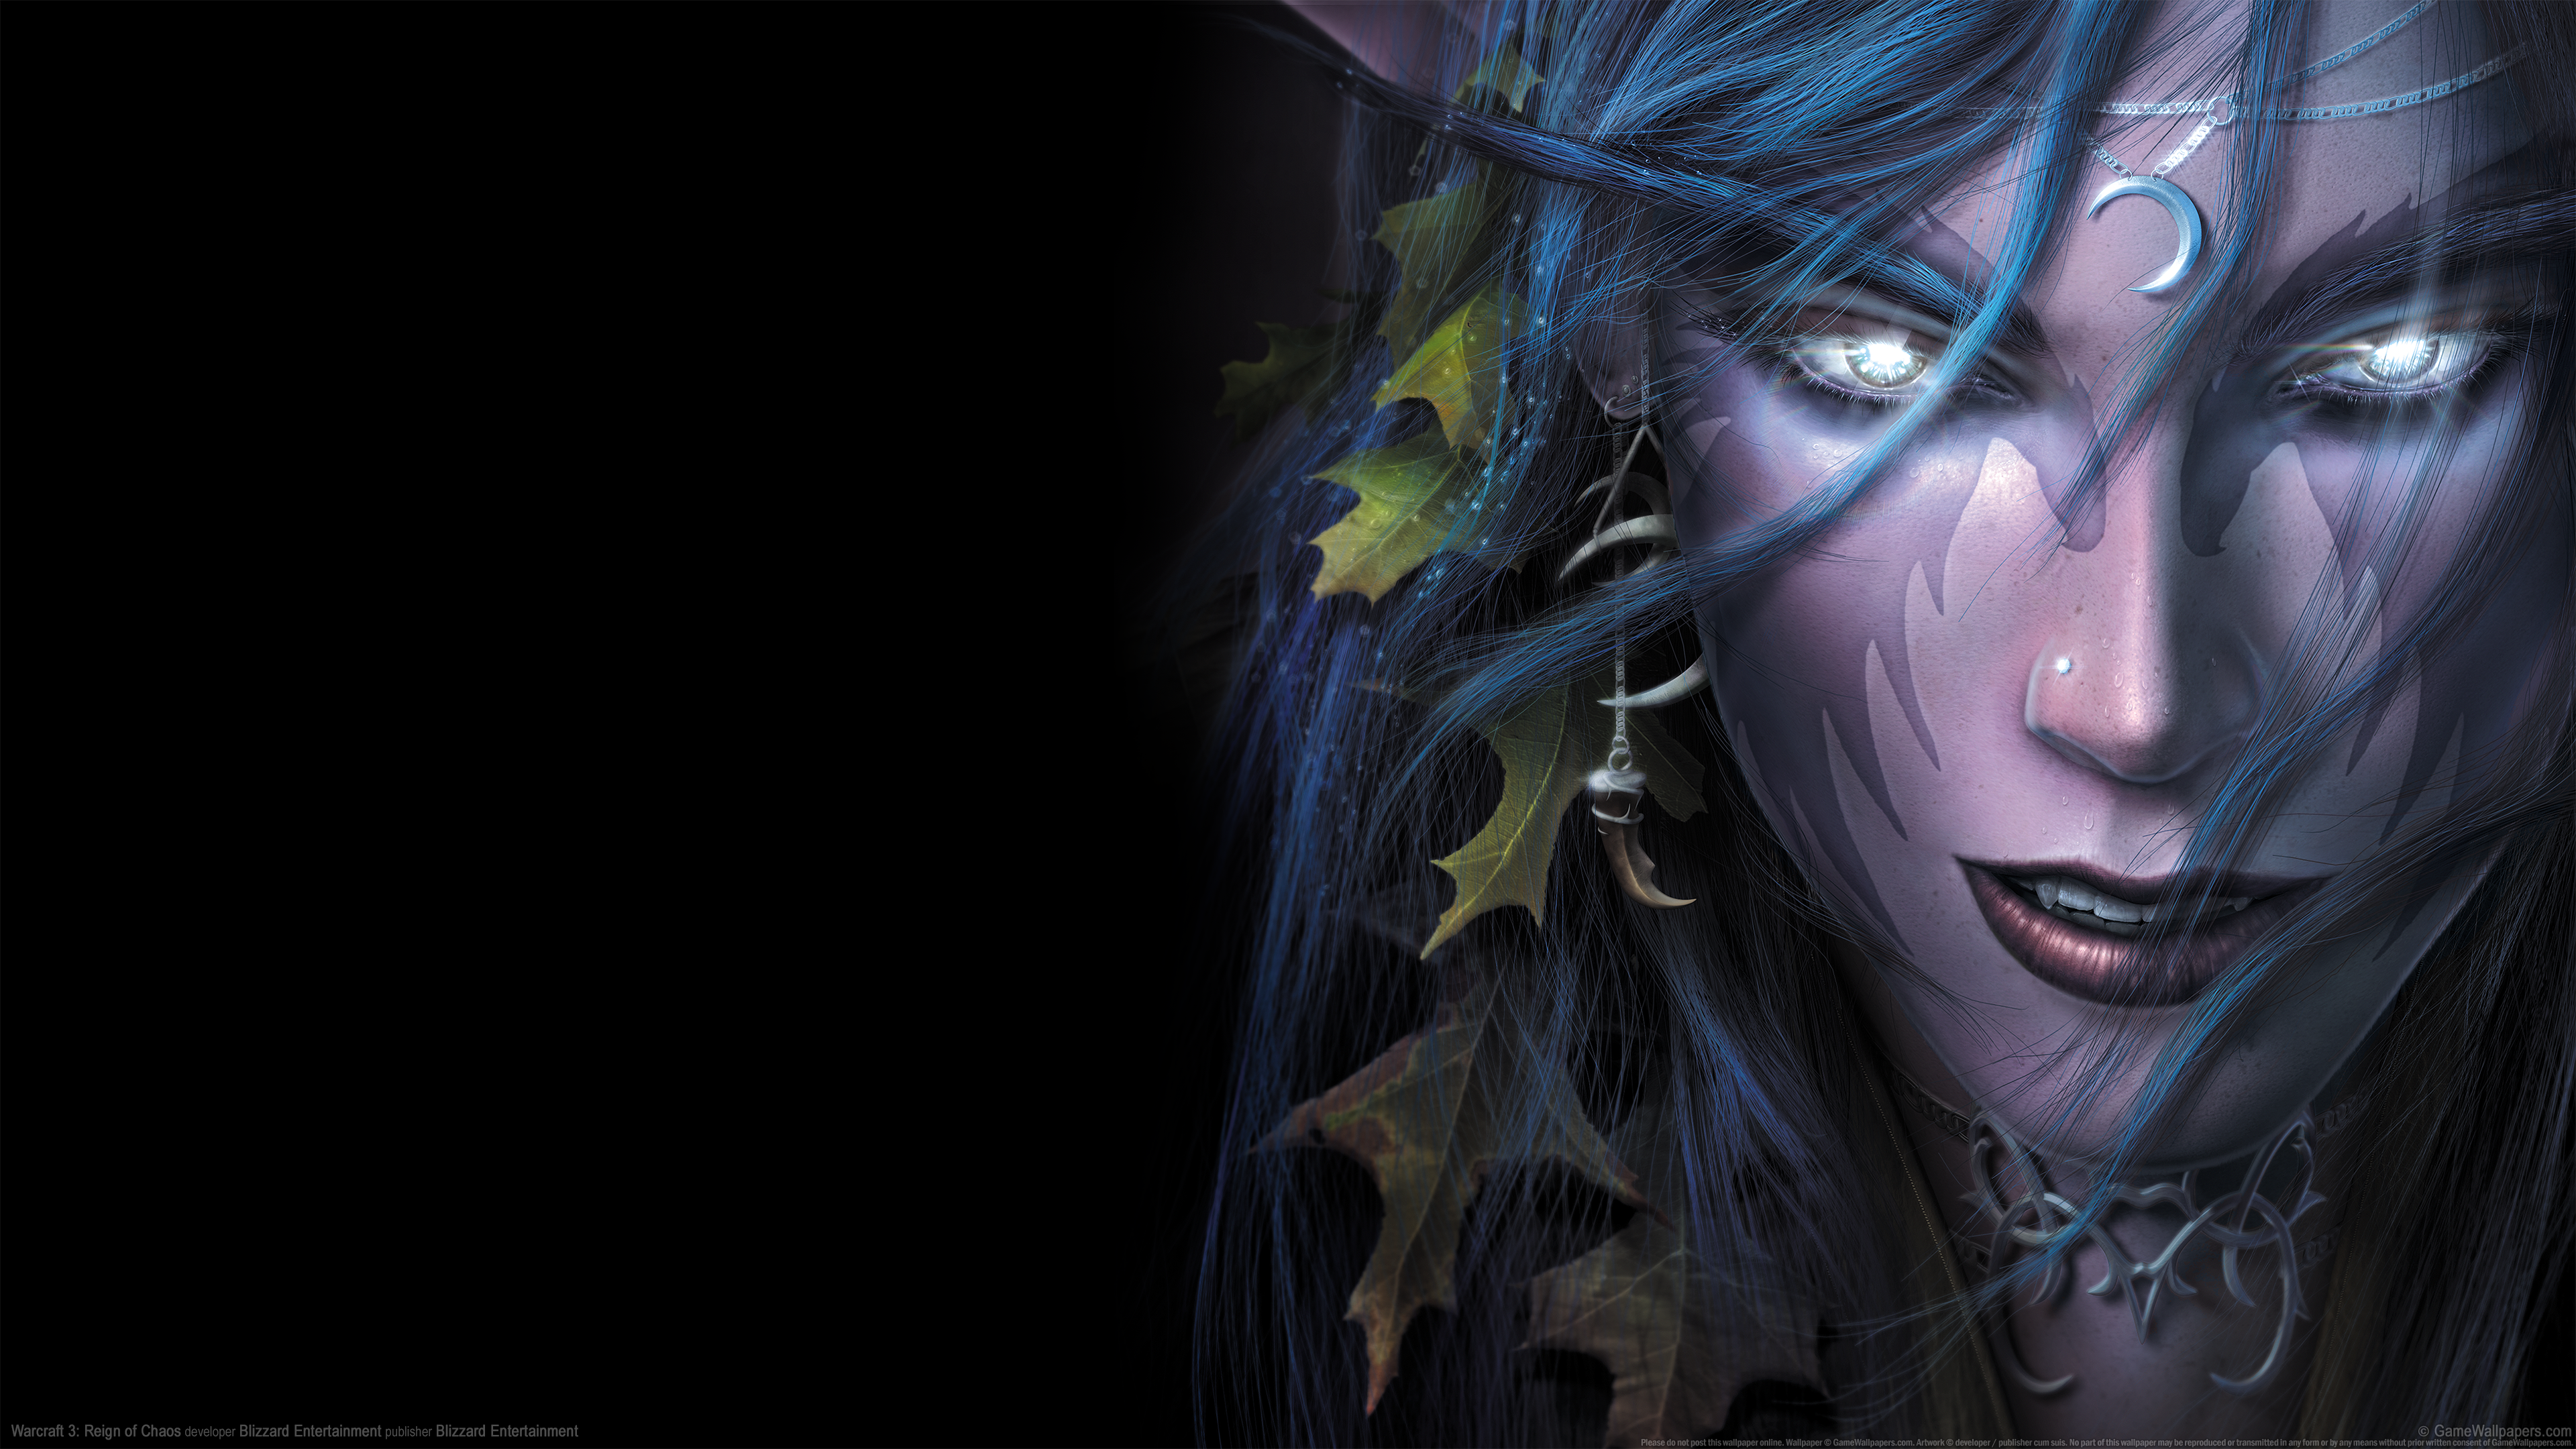 Warcraft 3: Reign of Chaos 3840x2160 wallpaper or background 23